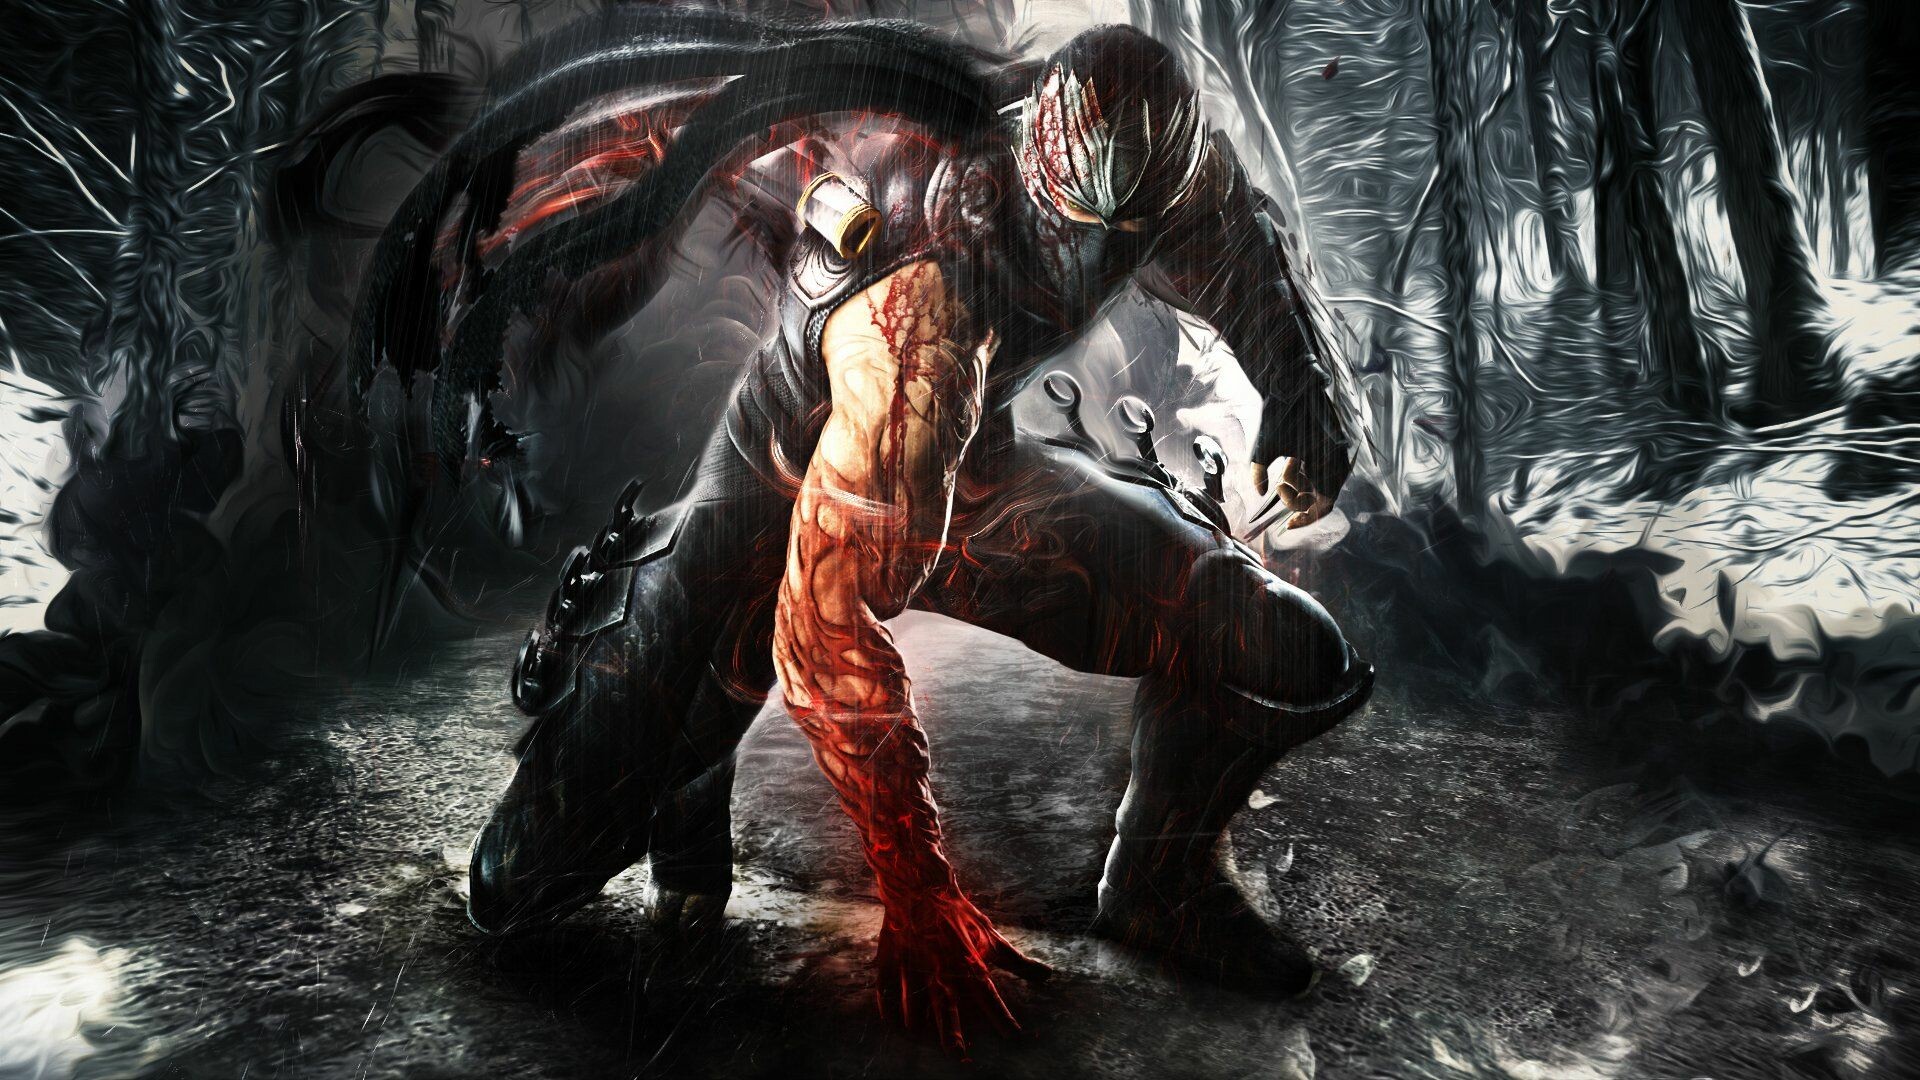 41+ Game Ninja Gaiden Wallpapers: HD, 4K, 5K for PC and Mobile | Download  free images for iPhone, Android